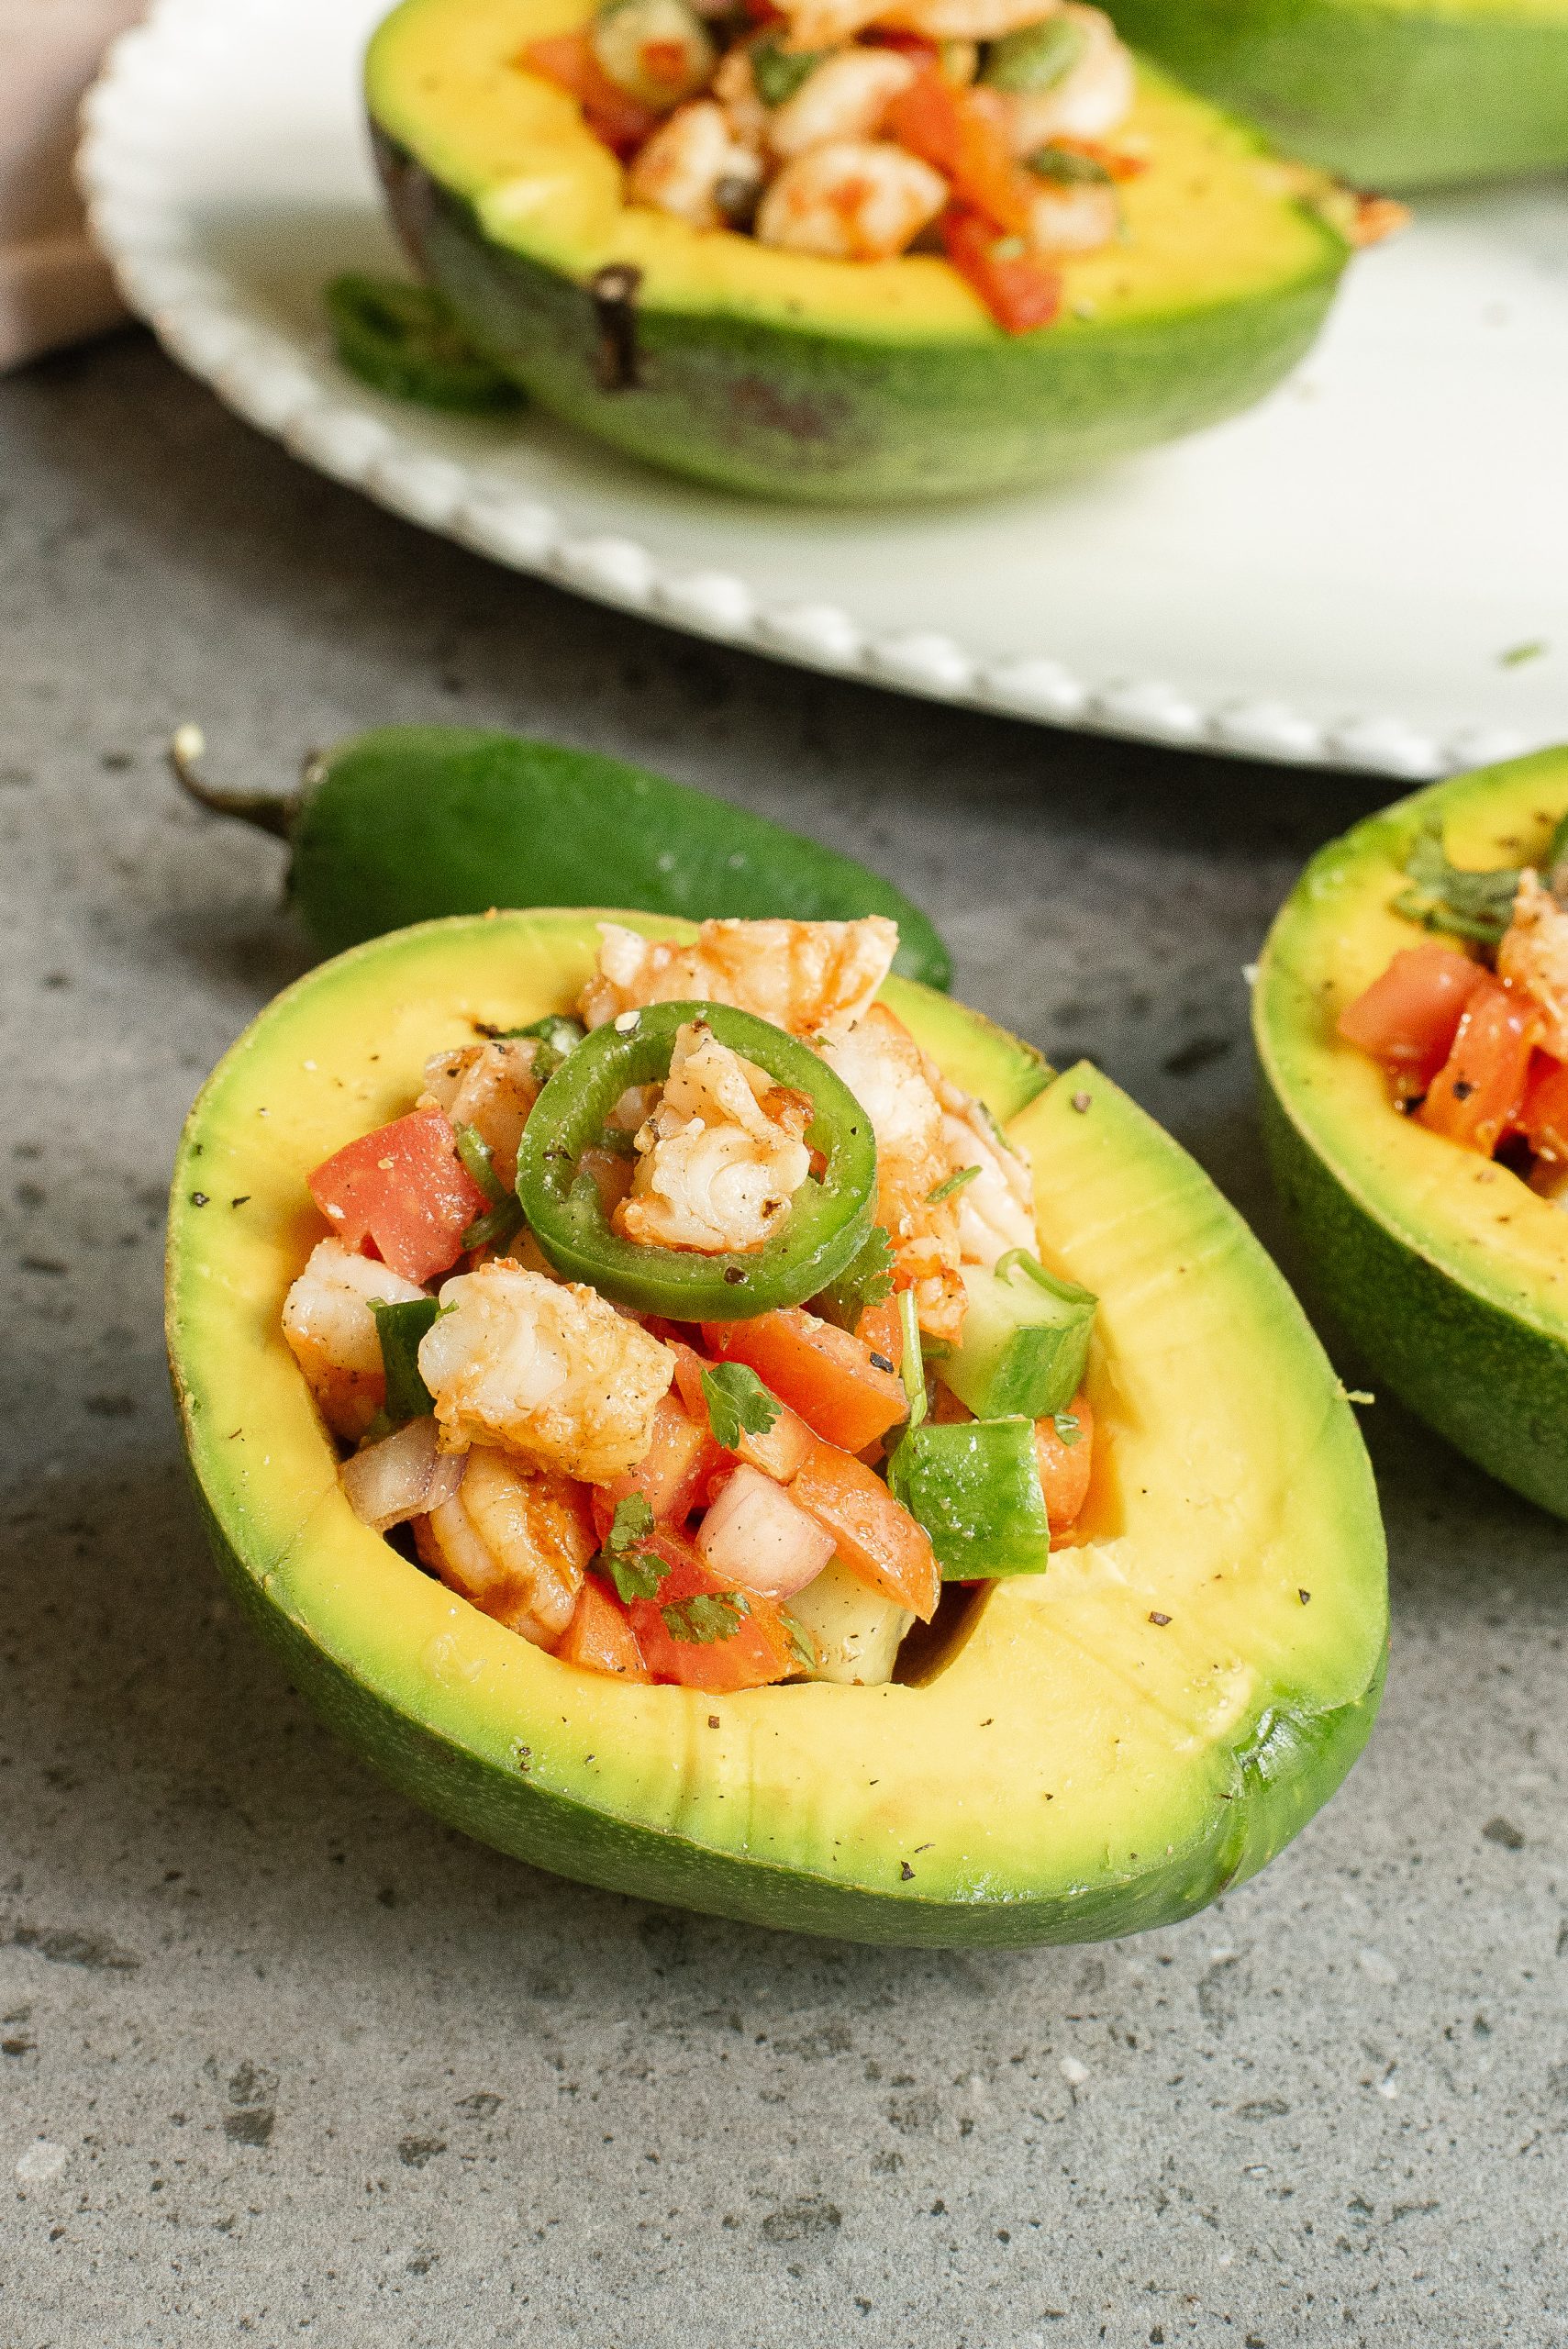 A halved avocado filled with a shrimp salad, topped with a slice of jalapeño, on a white plate.